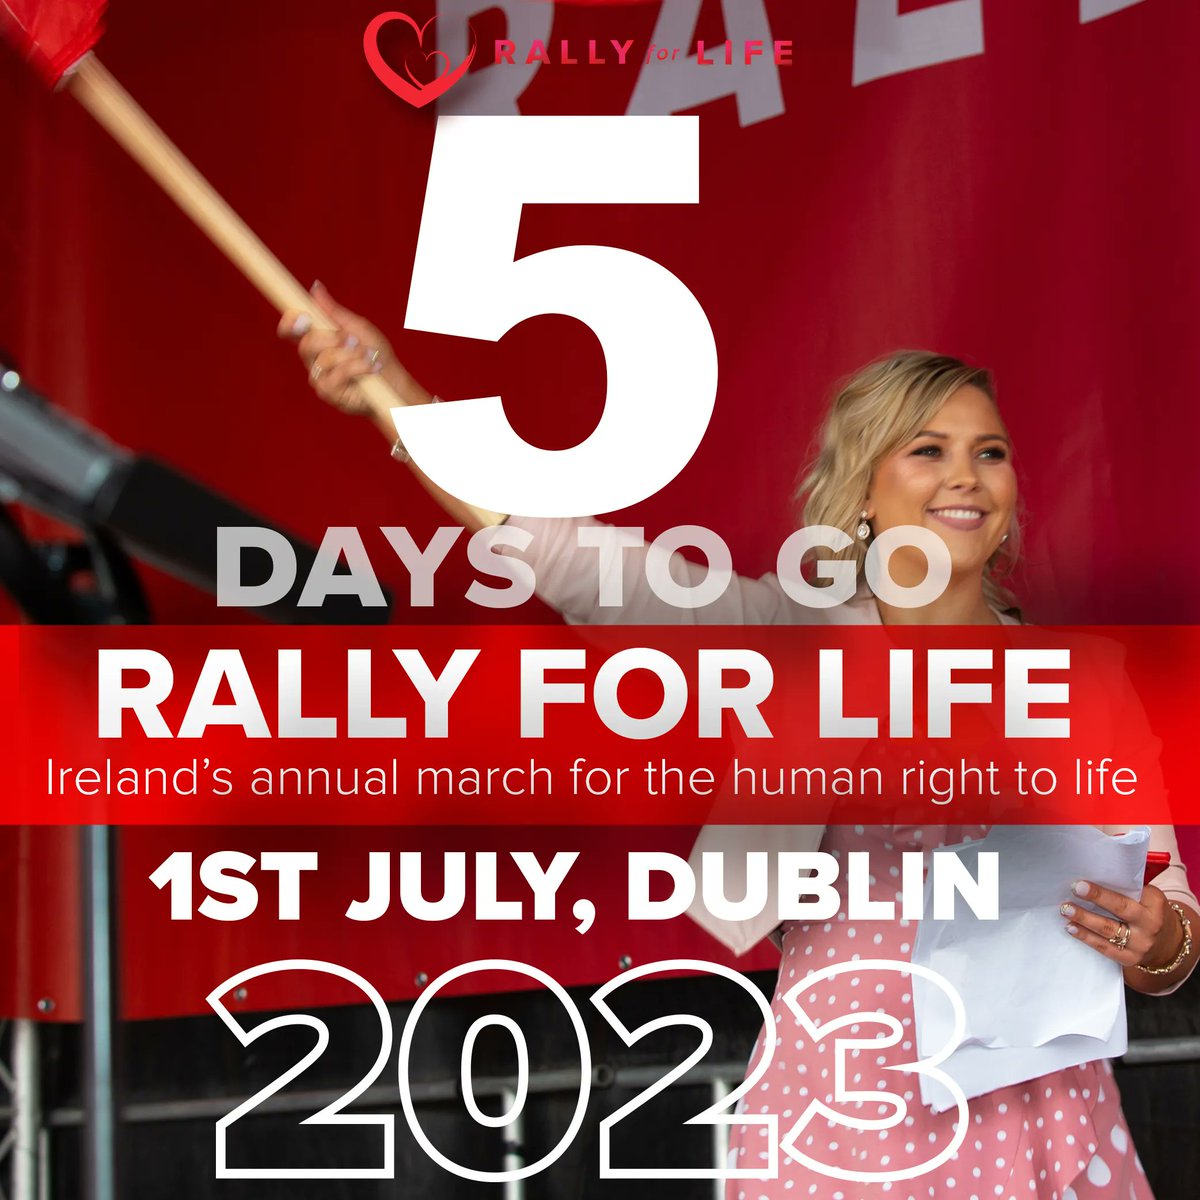 The Rally for Life is just 5 DAYS AWAY!! We cannot wait to gather with you all as we stand as a witness to life!! 

See you on Saturday at 1pm in Parnell Sq!!!

#StopAbortingOurFuture #RallyforLife #WhyWeMarch